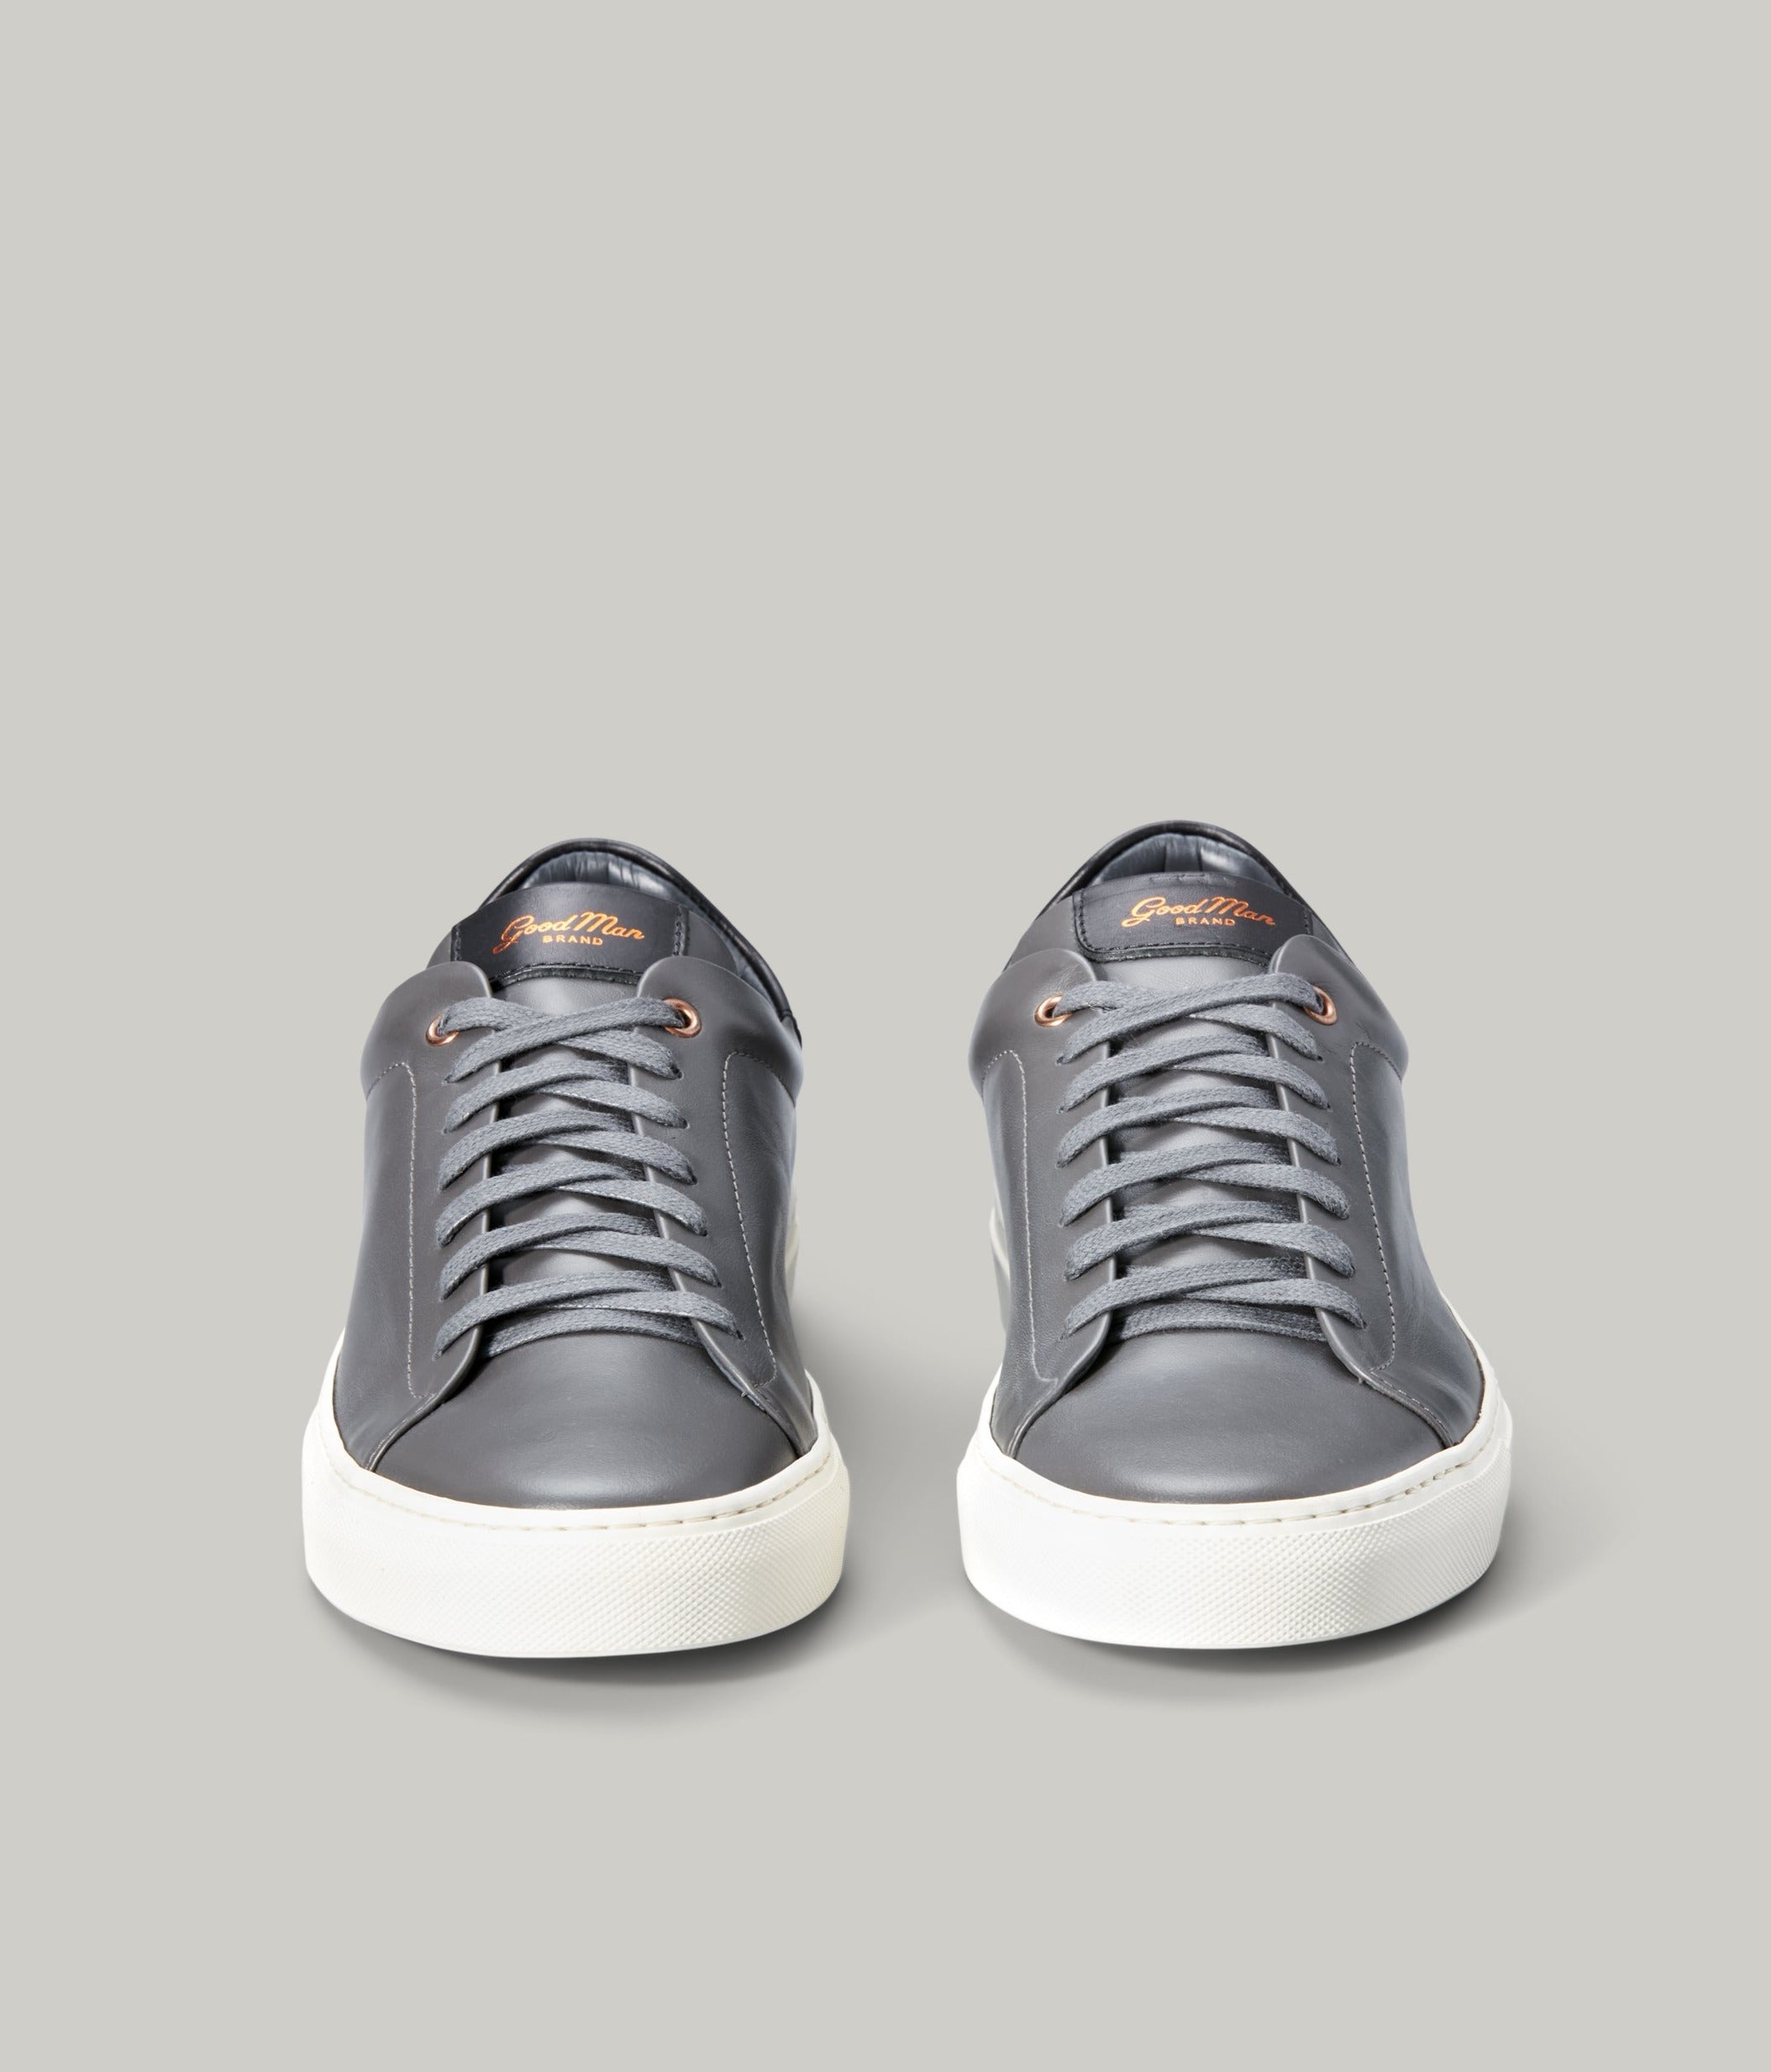 Legend Lo Top Sneaker in Nappa Leather - Charcoal / Black